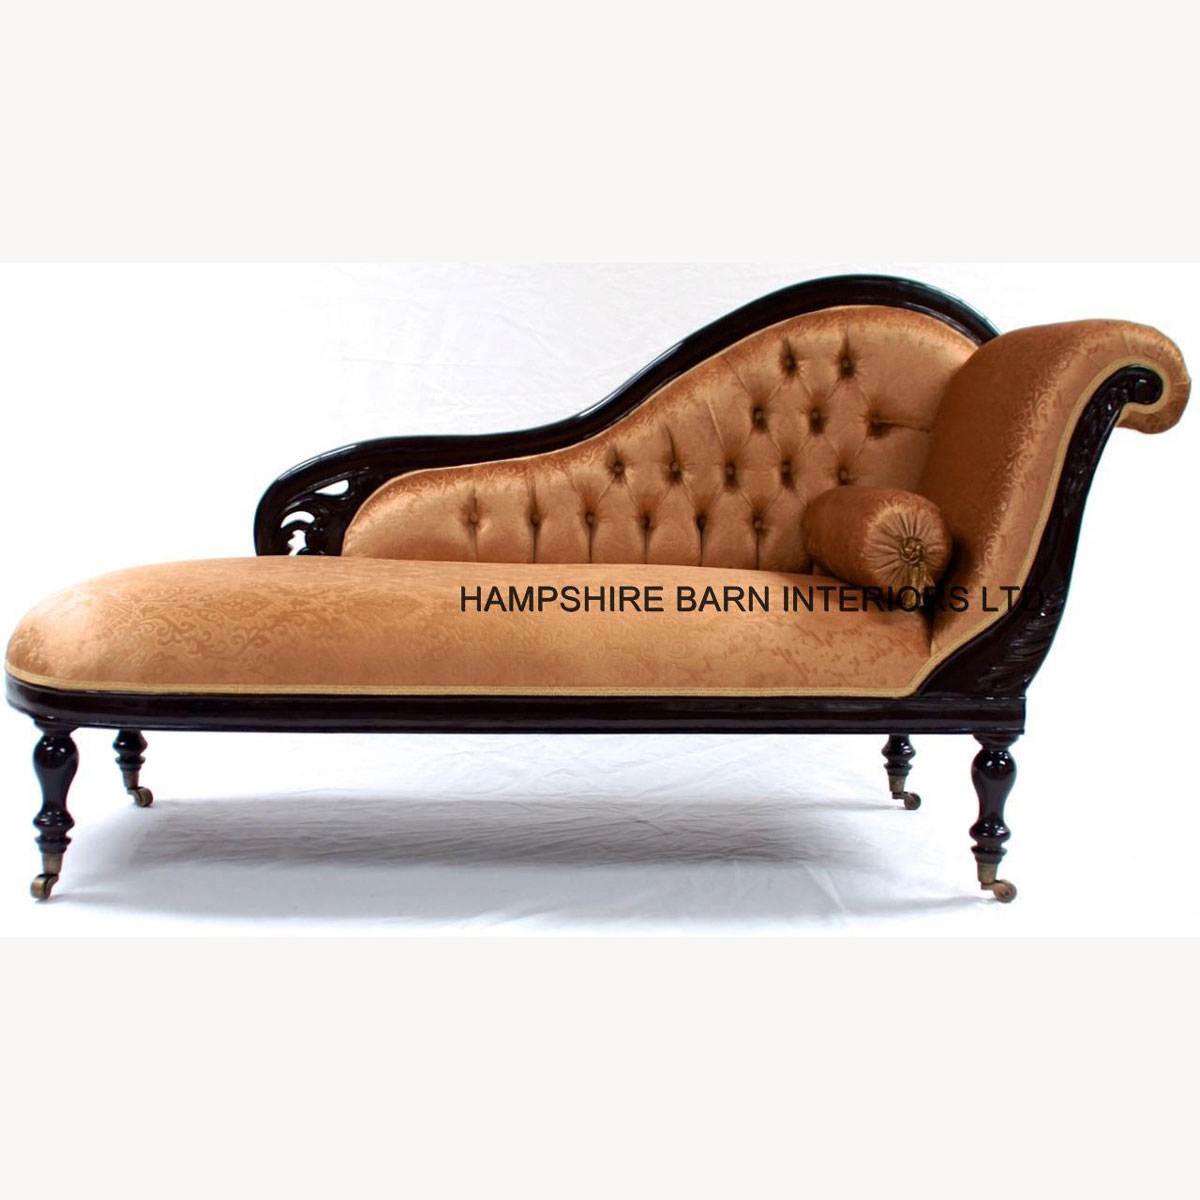 Classical Victorian Style Gold Chaise Longue With Castors With Gold Fabric 1 - Hampshire Barn Interiors - Classical Victorian Style Gold Chaise Longue With Castors With Gold Fabric -